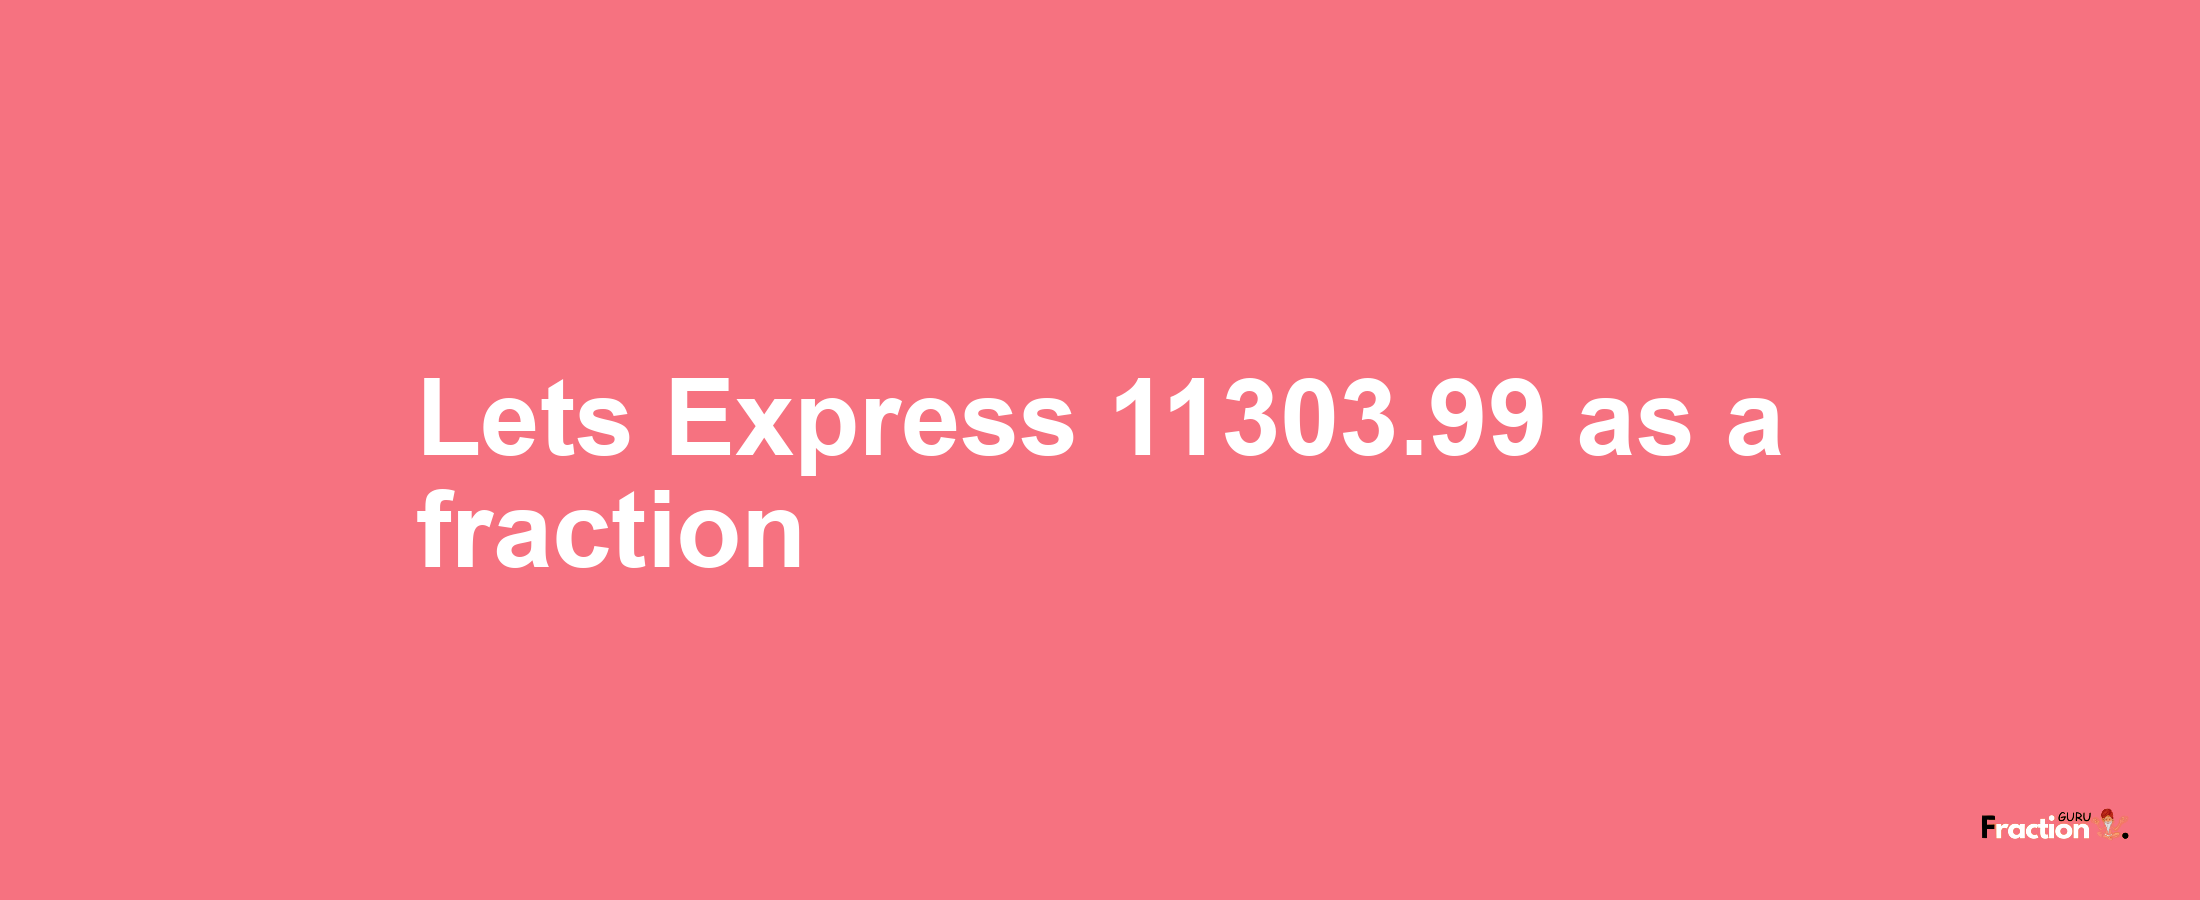 Lets Express 11303.99 as afraction